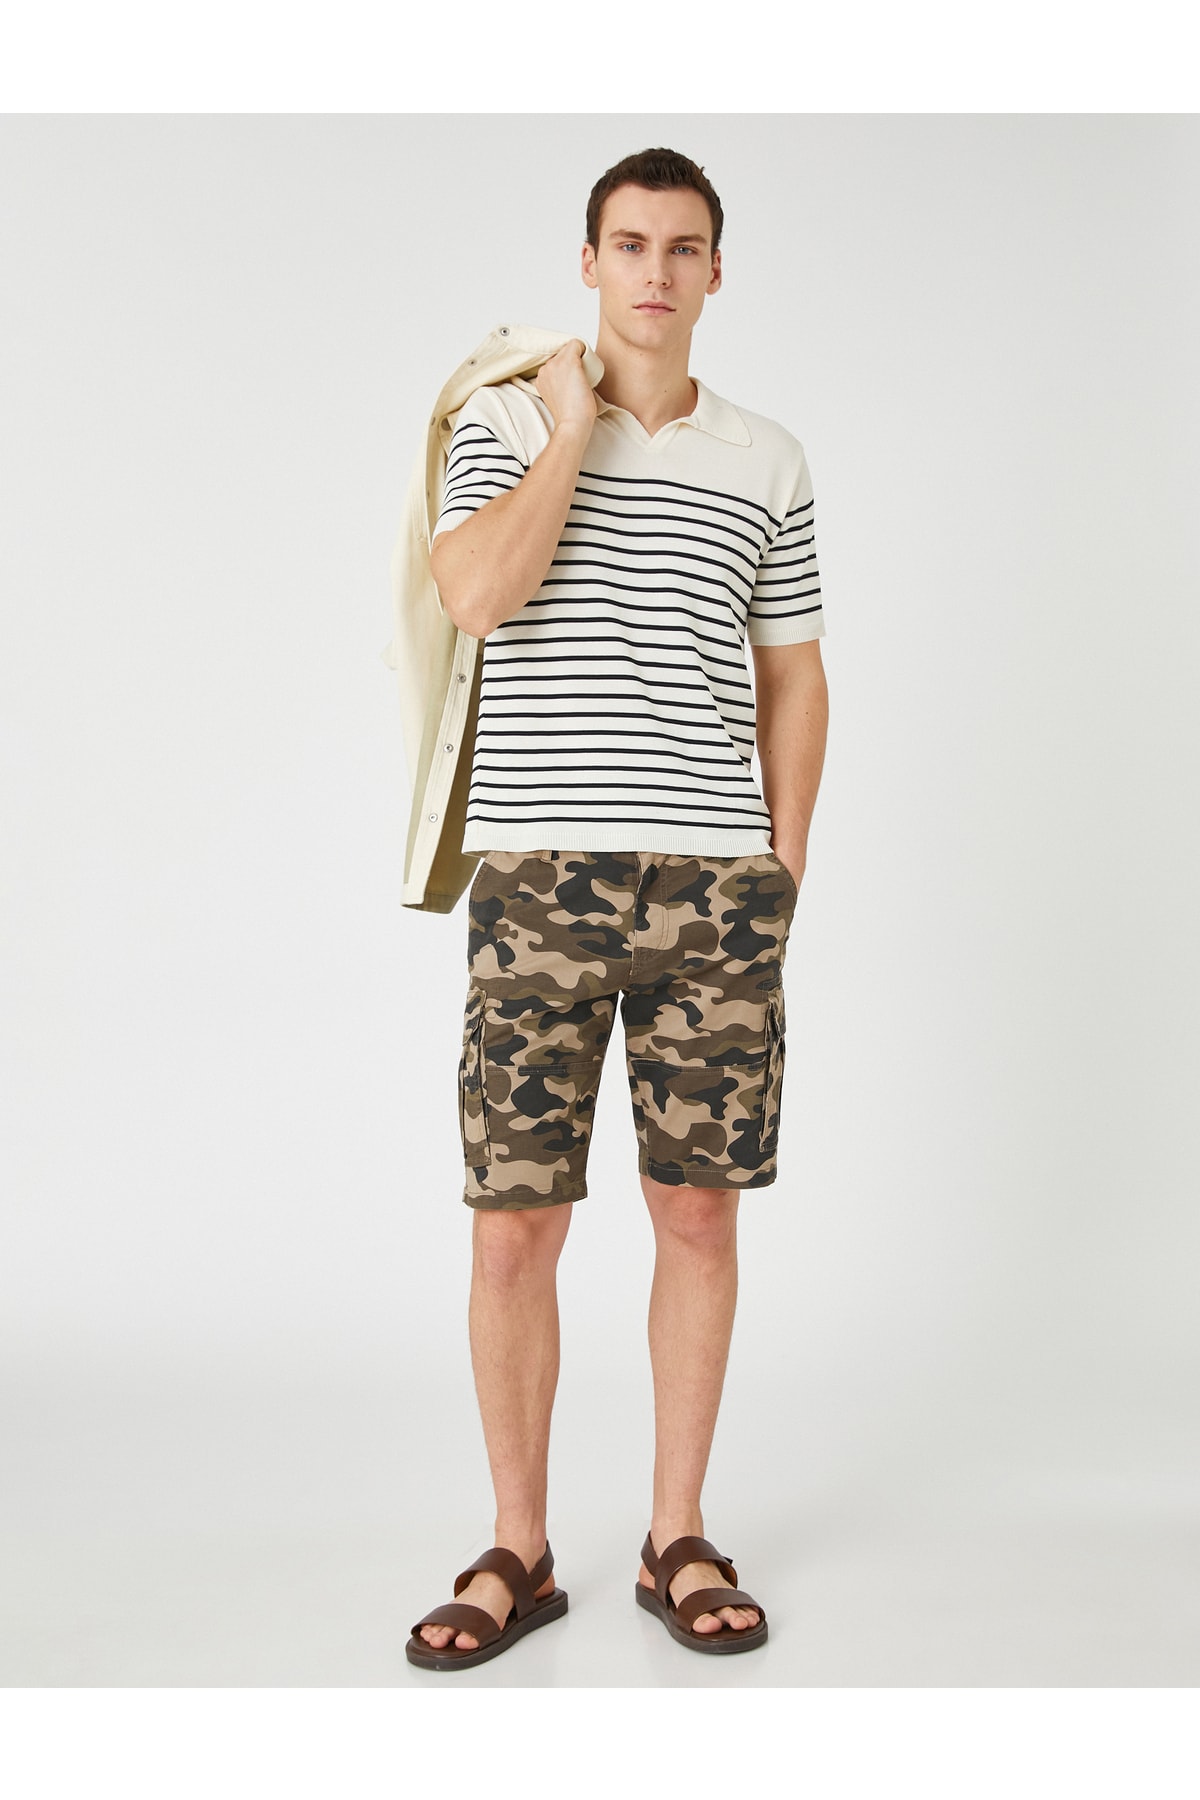 Koton Cargo Shorts Camouflage Printed with Pocket Detailed and Button.